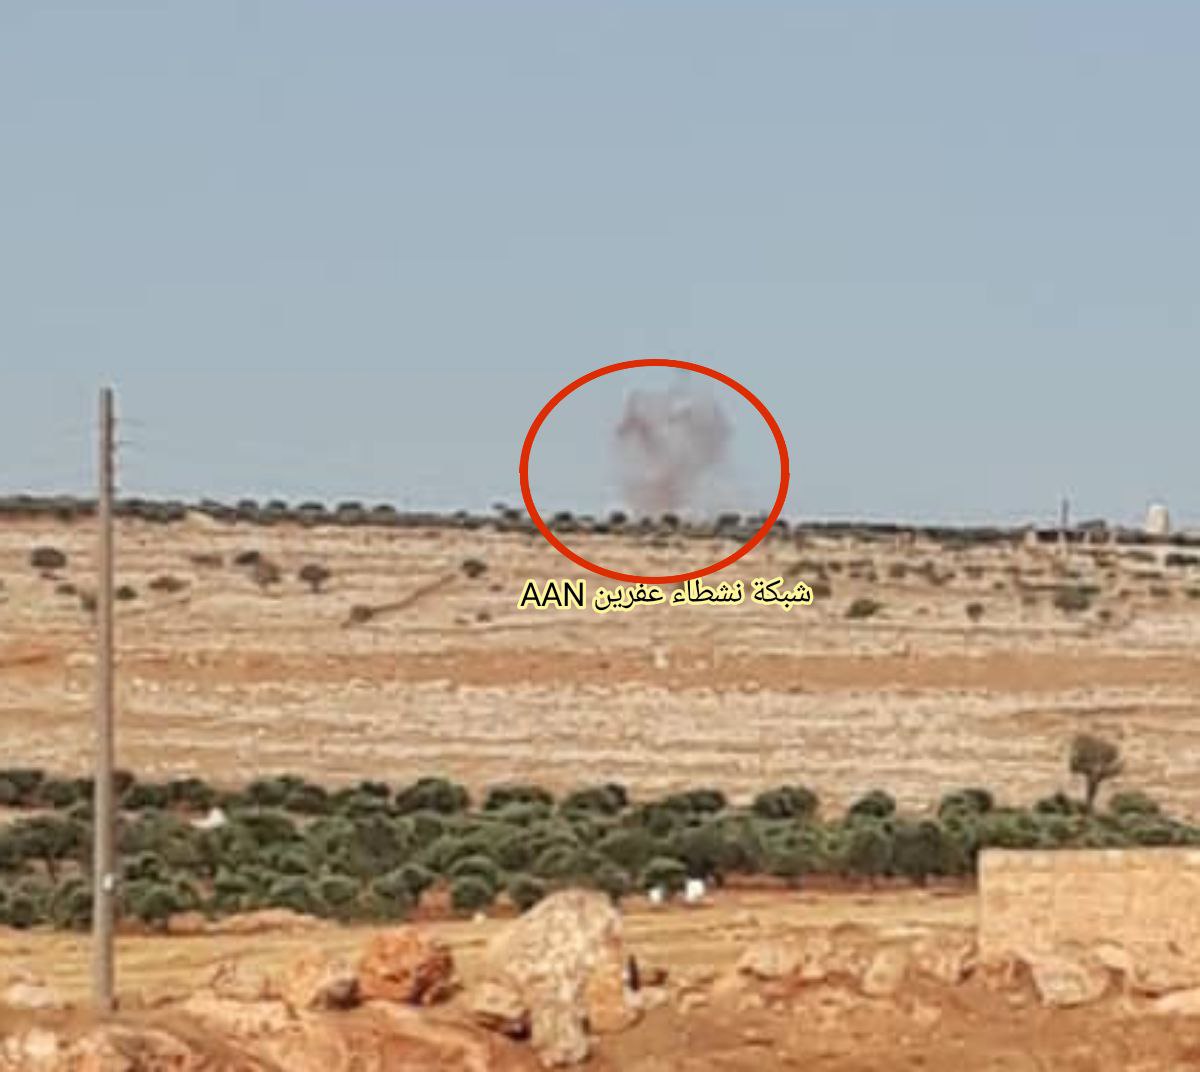 Turkish artillery units hit points belonging to the YPG in the Tel Rifat region